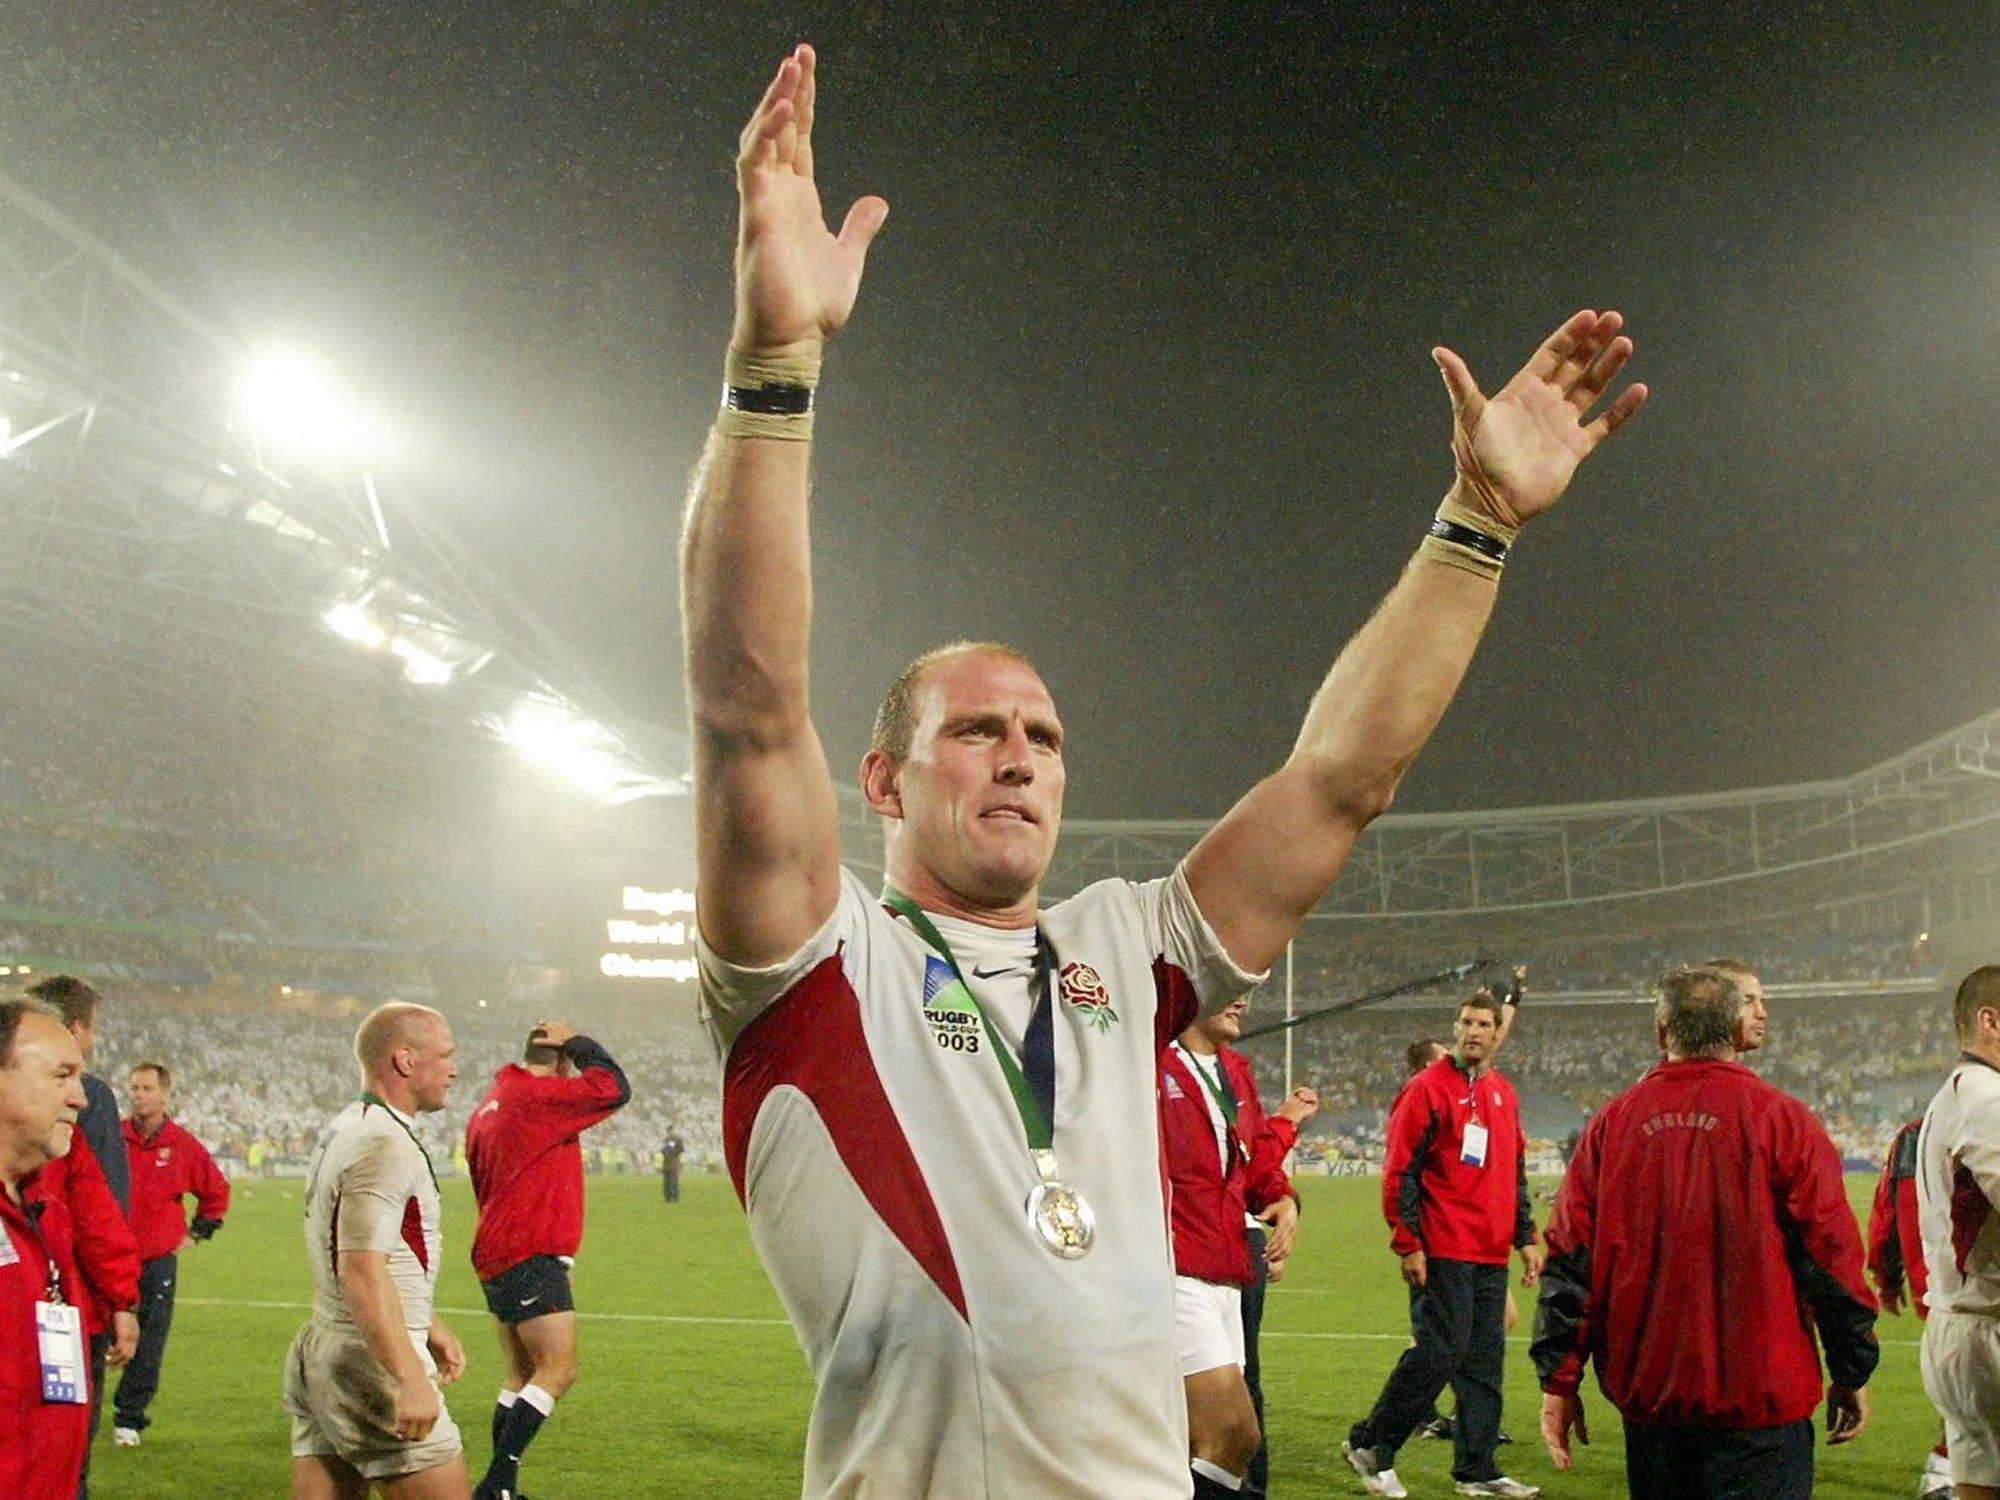 Lawrence Dallaglio celebrating English rugby victory